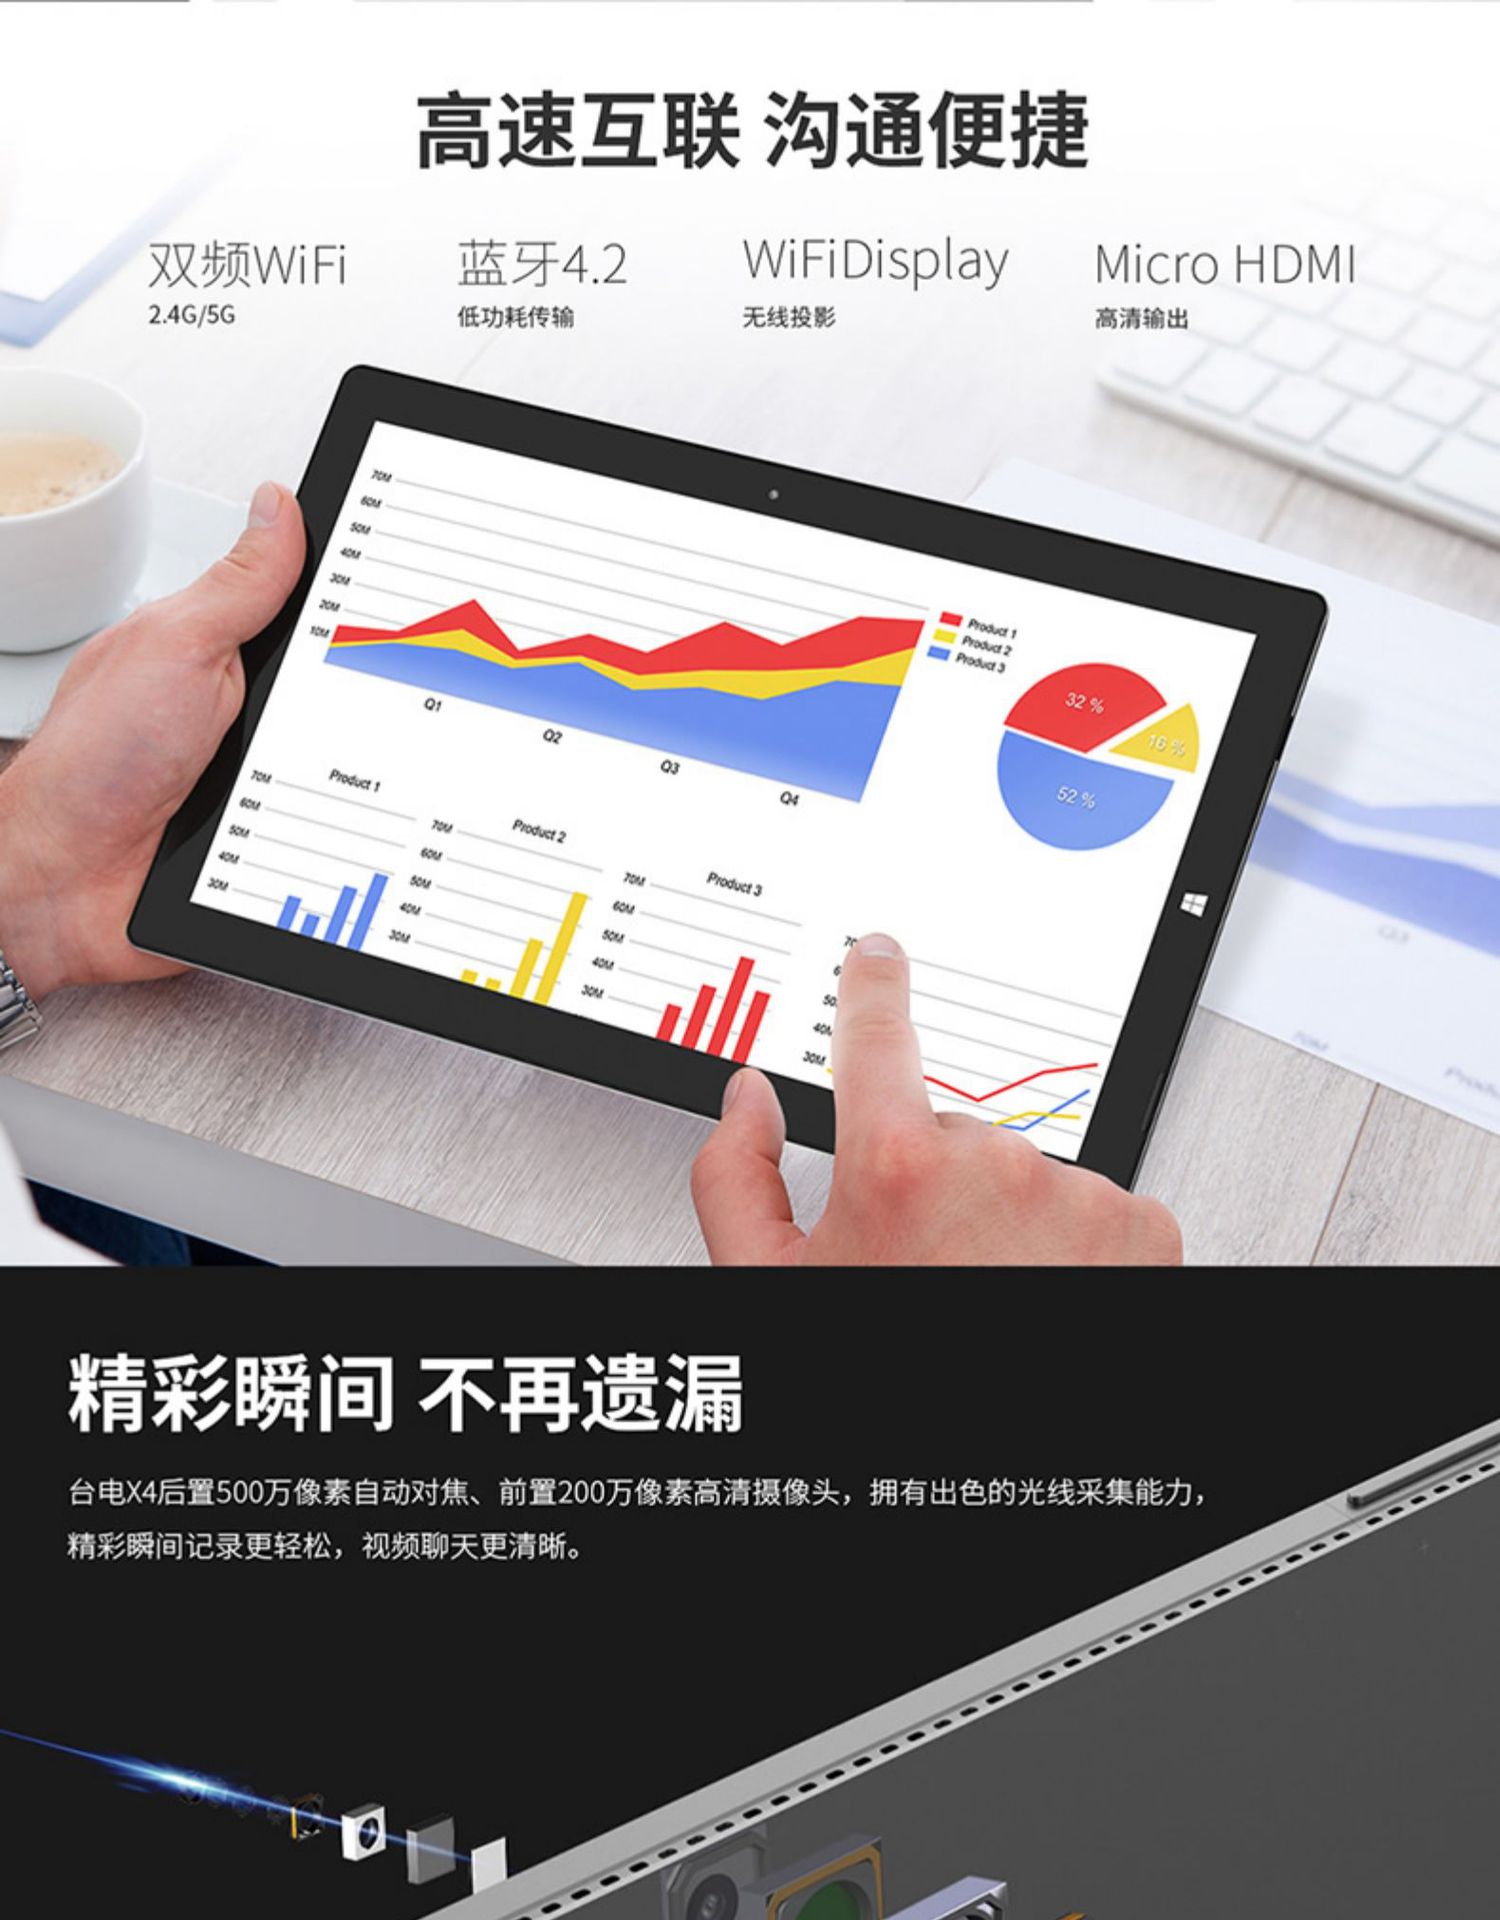 11.6-inch new ultra-thin 4g fully connected tablet X20 ten core type C business office gaming computer